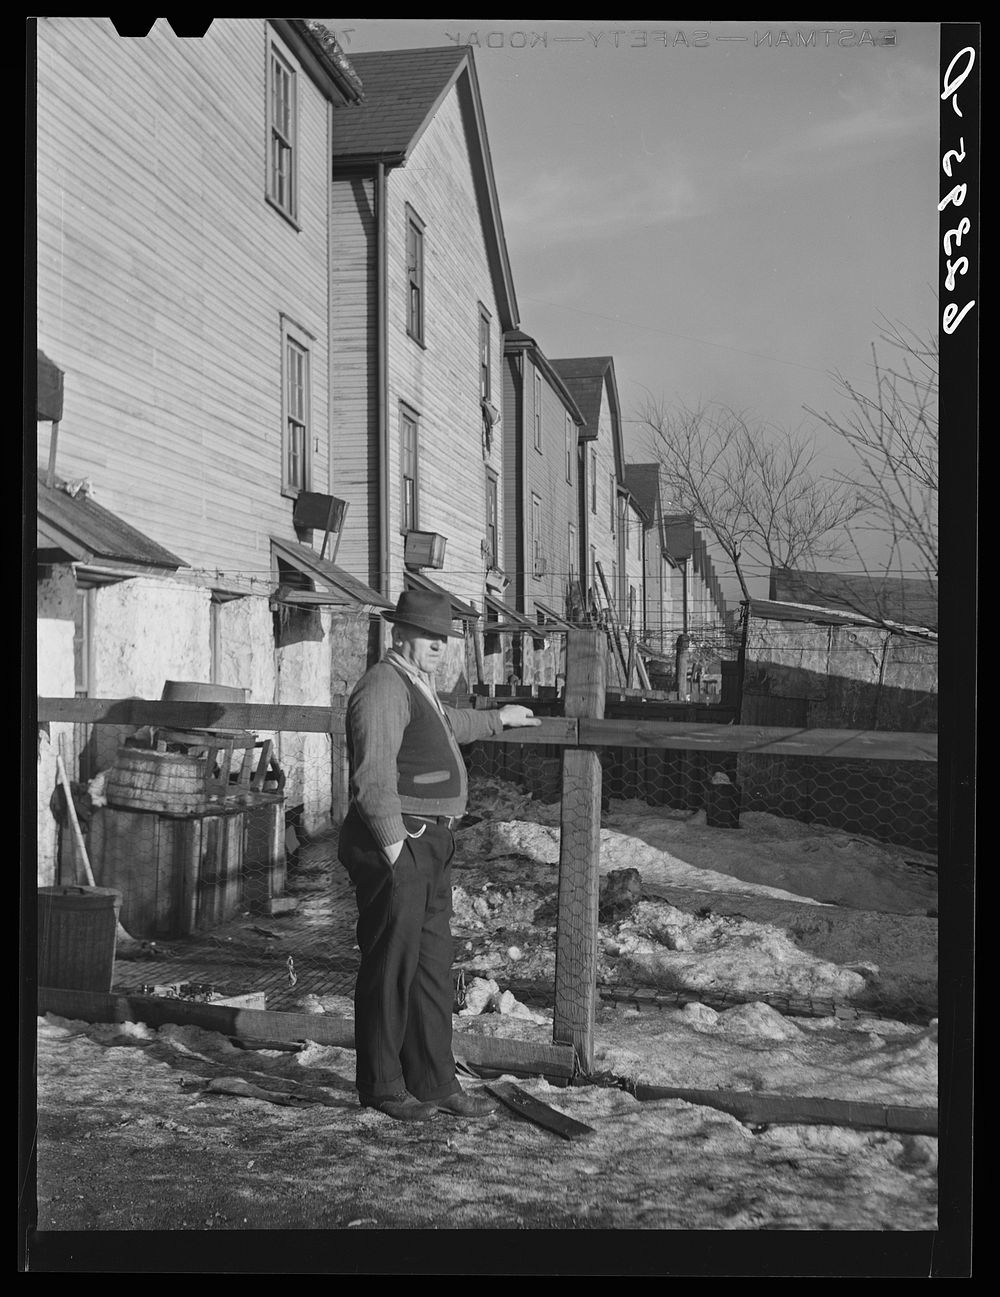 Company houses. Midland, Pennsylvania. Sourced from the Library of Congress.